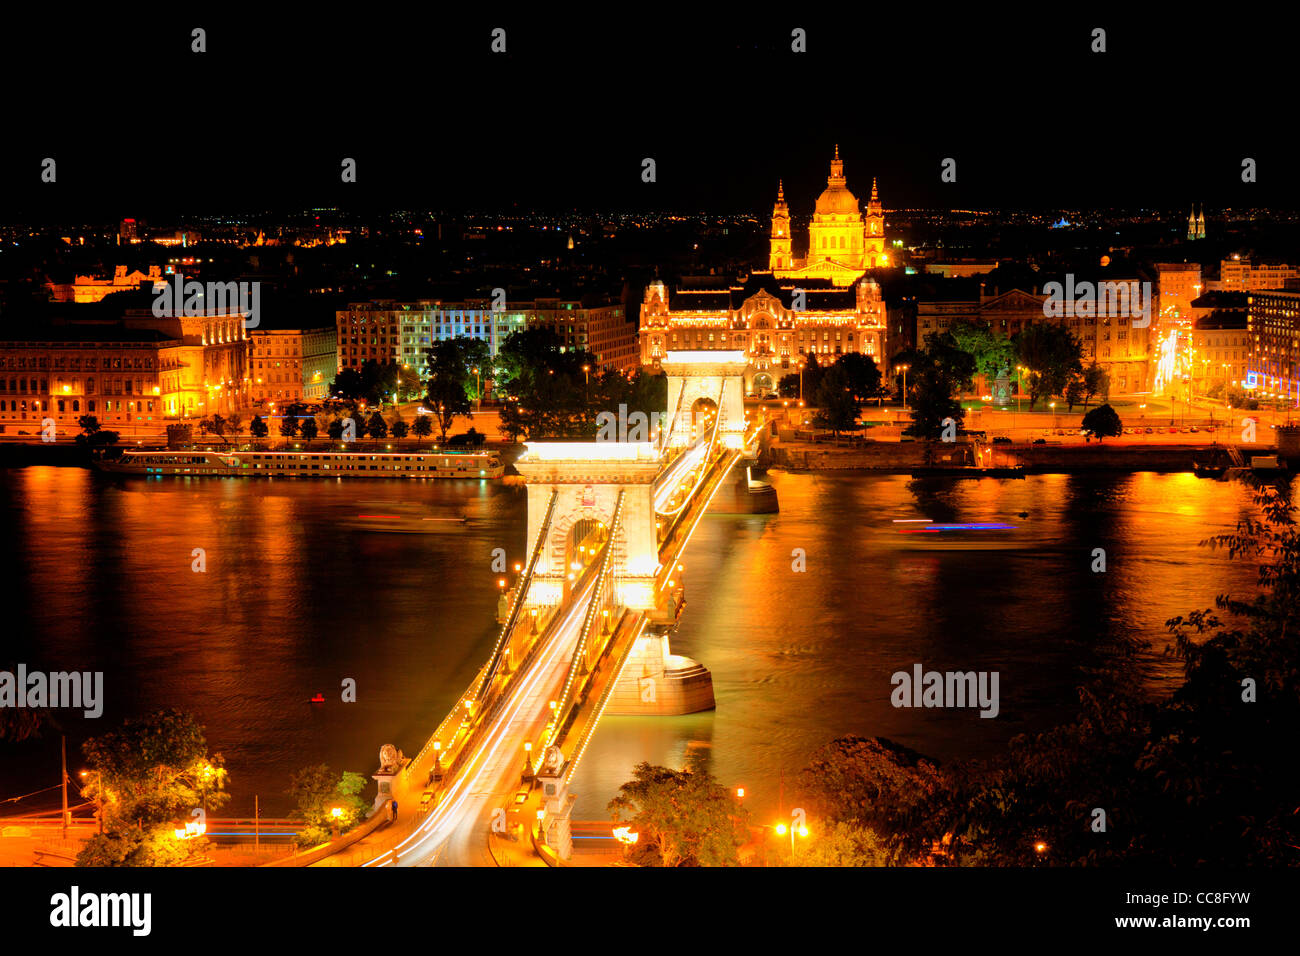 The Széchenyi Chain Bridge (Hungarian: Lánchíd) is a suspension bridge that spans the River Danube between Buda and Pest. Night Stock Photo